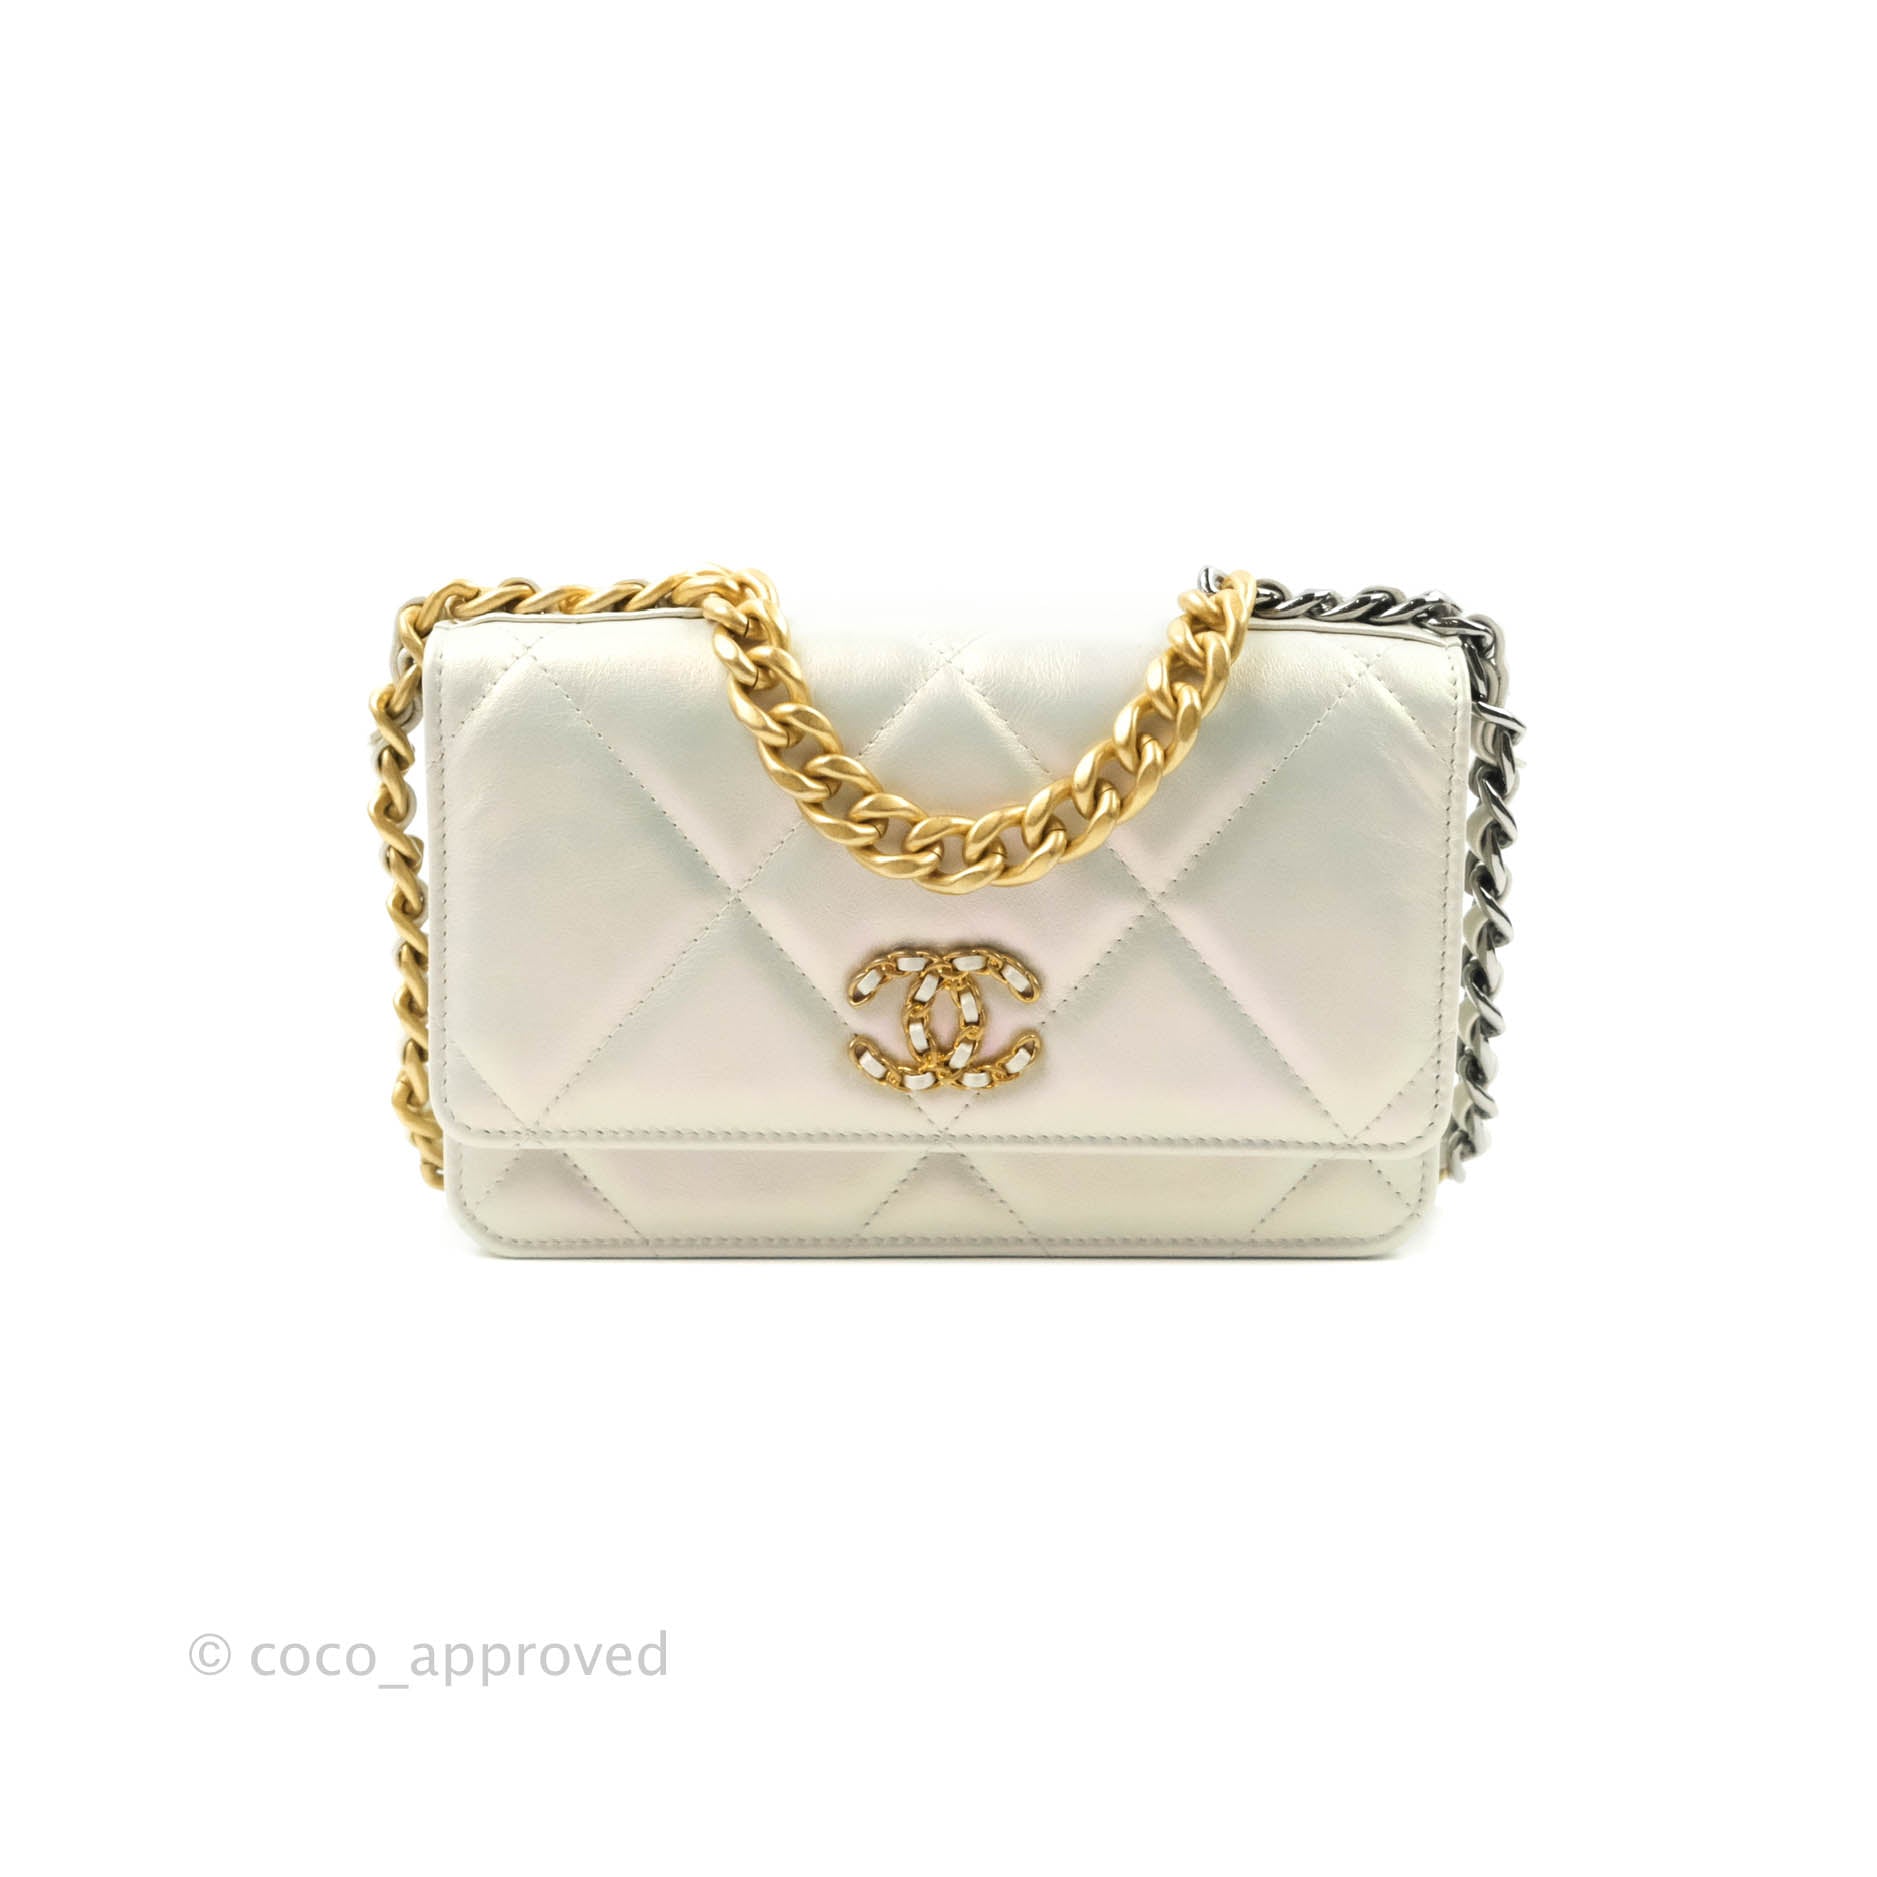 All Brand Shop - New Chanel 19 WOC in Pearly White